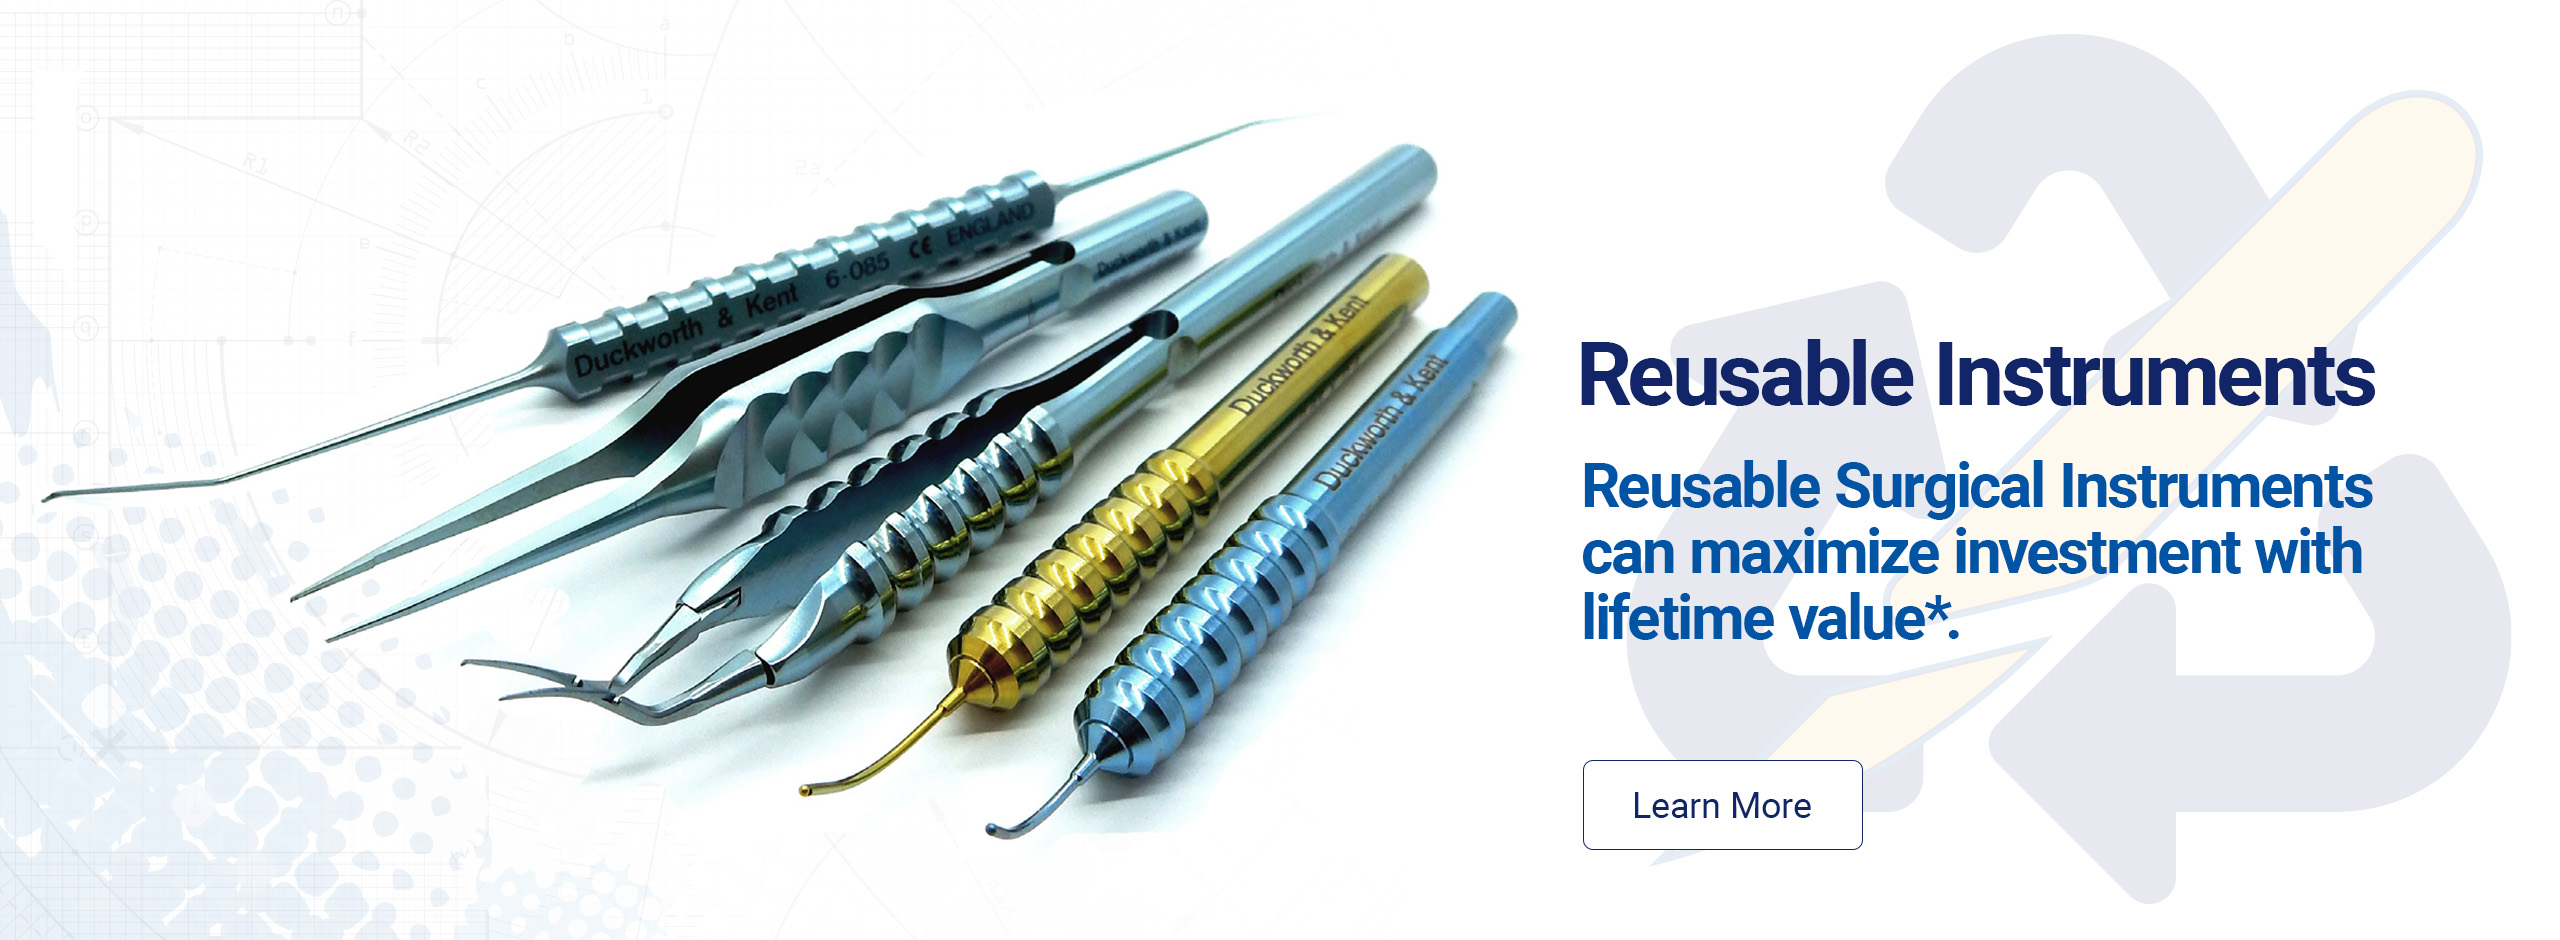 Crestpoint Ophthalmics maximize investment with reusable surgical instruments